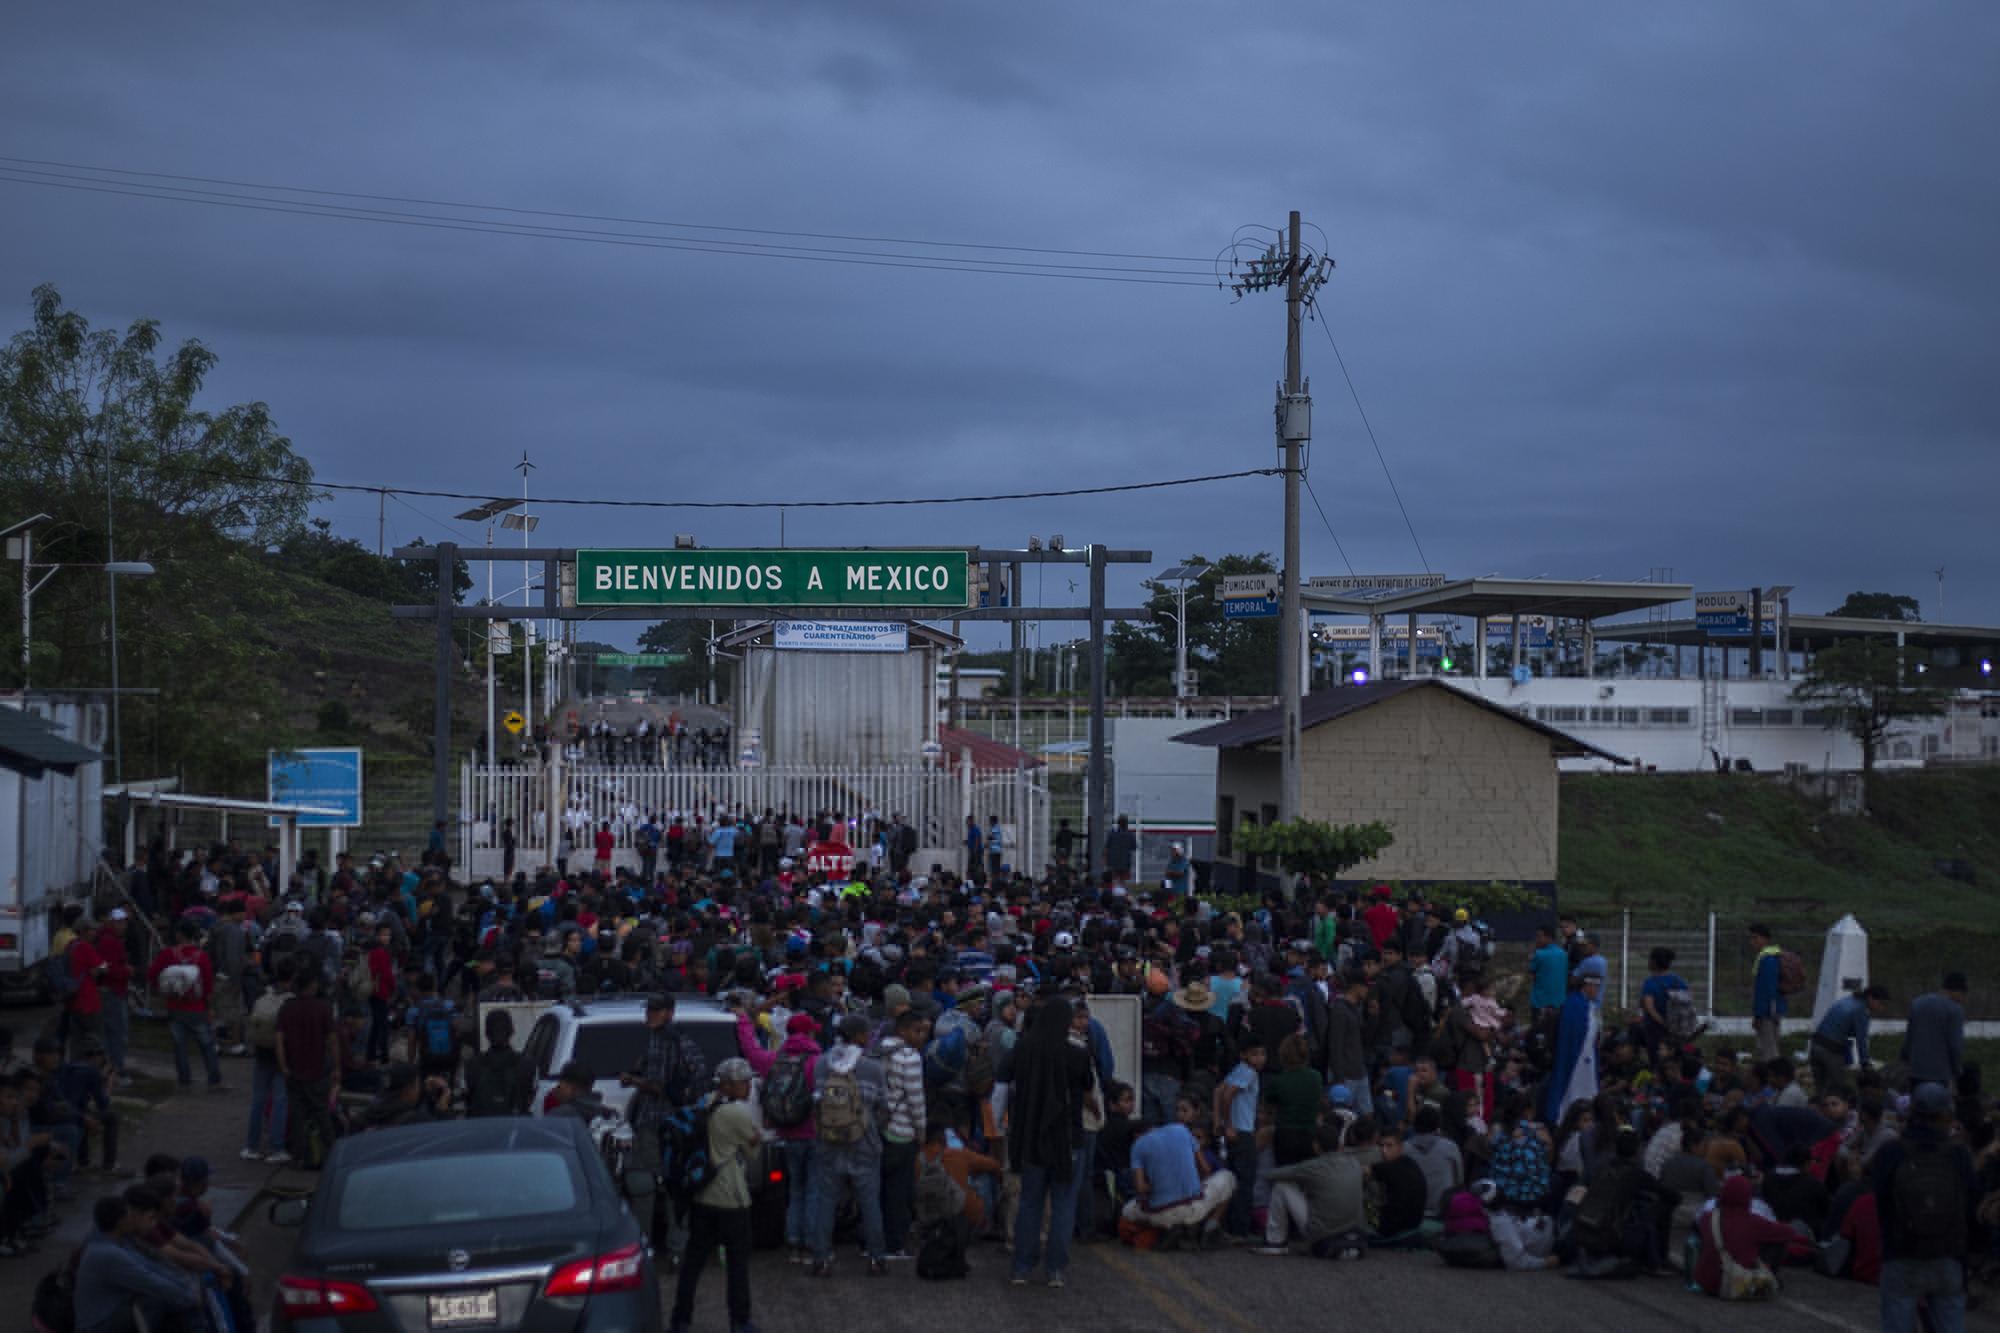 As the migrant caravan arrived, Mexican authorities completely sealed off access to the border port of entry at El Ceibo. More than 800 people set up camp for hours in front of the little town’s main street. Photo by Víctor Peña.